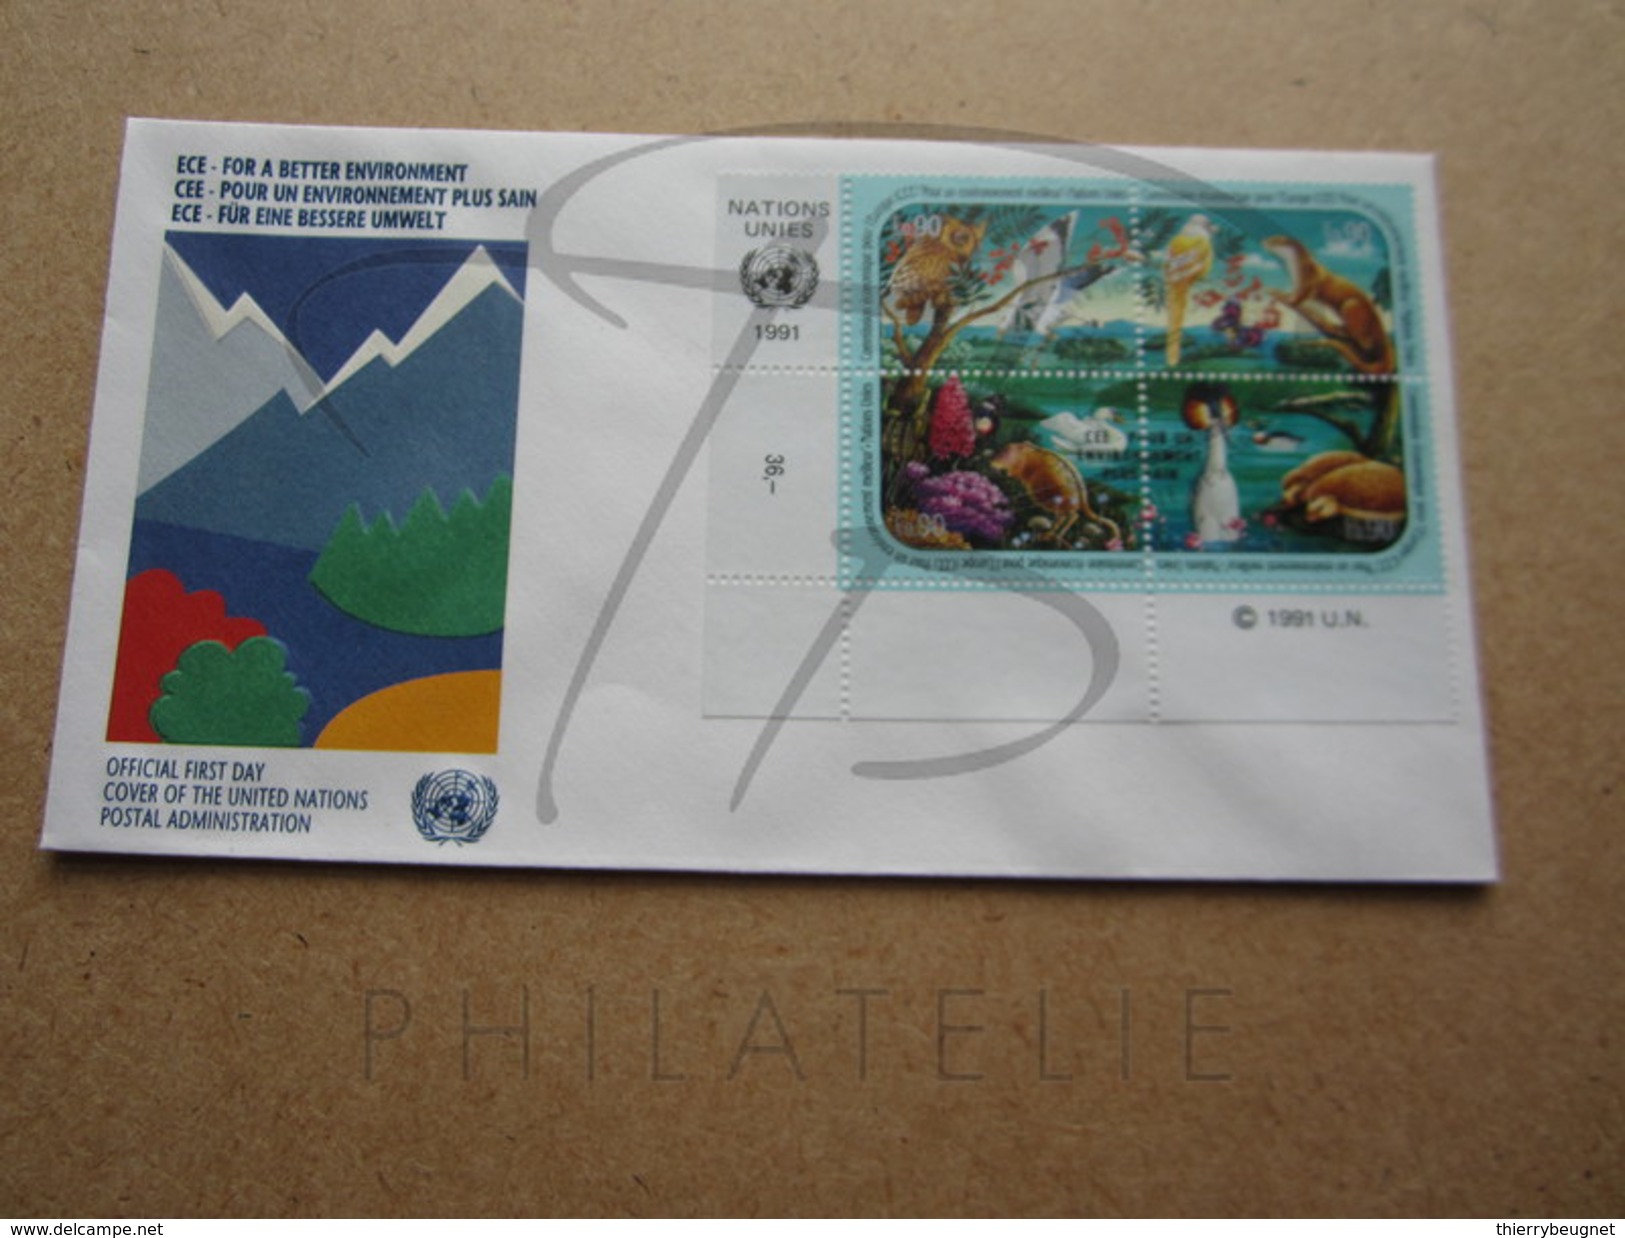 NATIONS UNIES GENEVE FDC N° 202 - 205 !!! - FDC